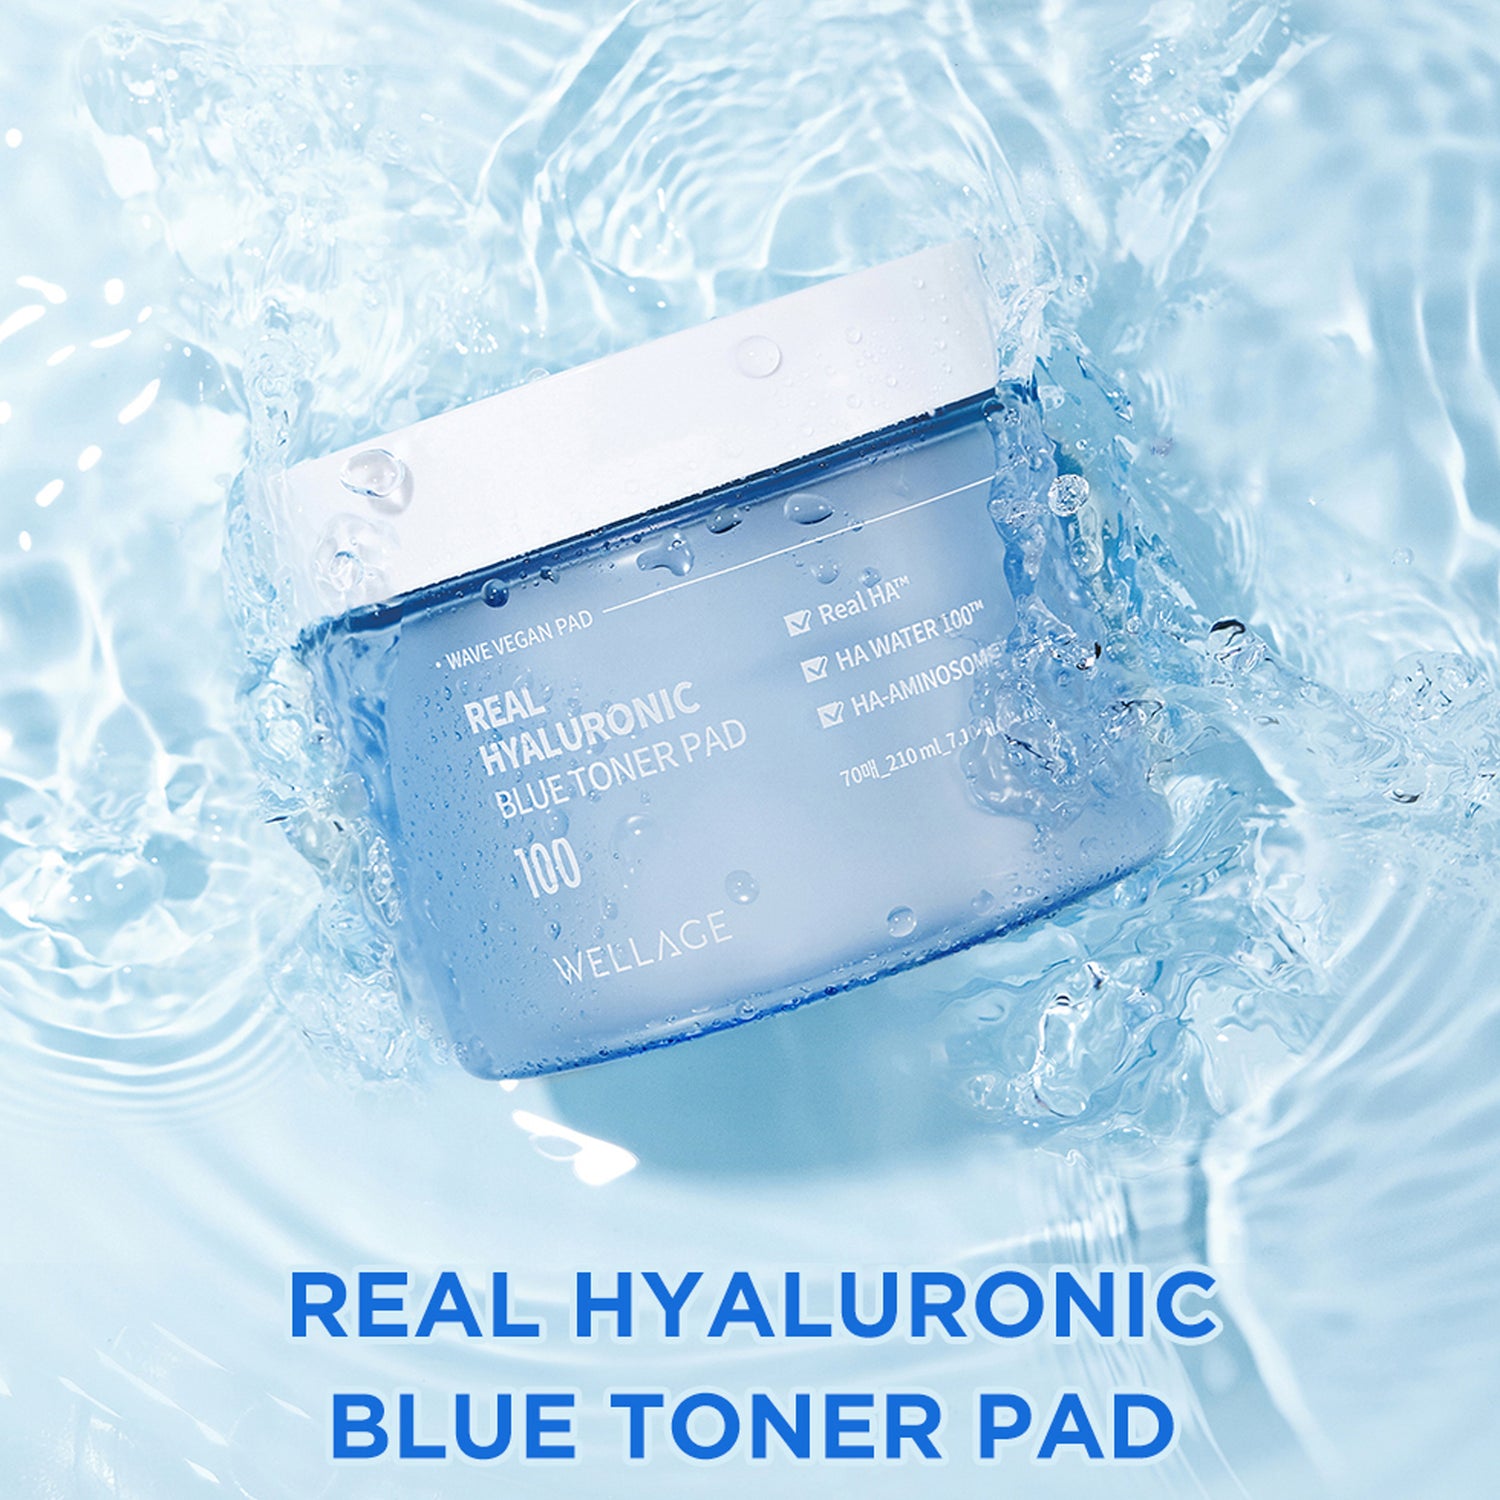 WELLAGE Real Hyaluronic Blue Toner Pad 210ml